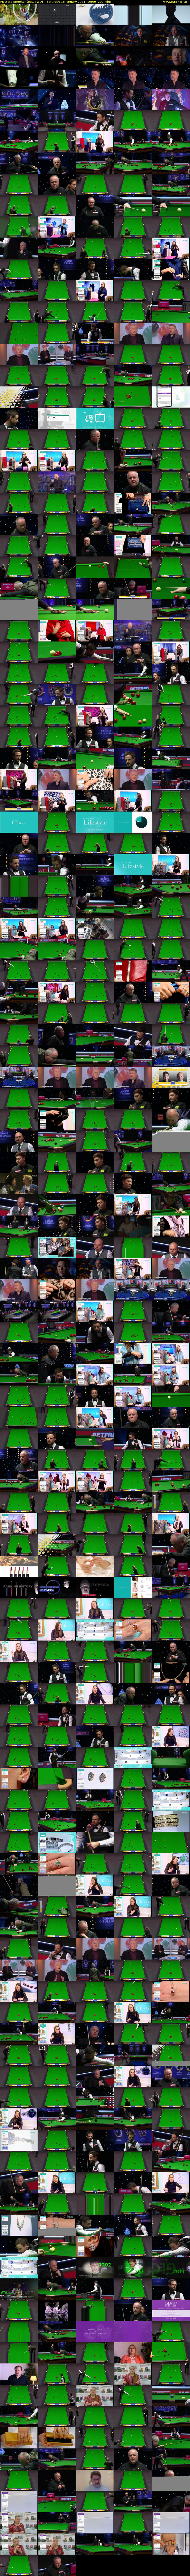 Masters Snooker (BBC TWO) Saturday 16 January 2021 19:00 - 22:20